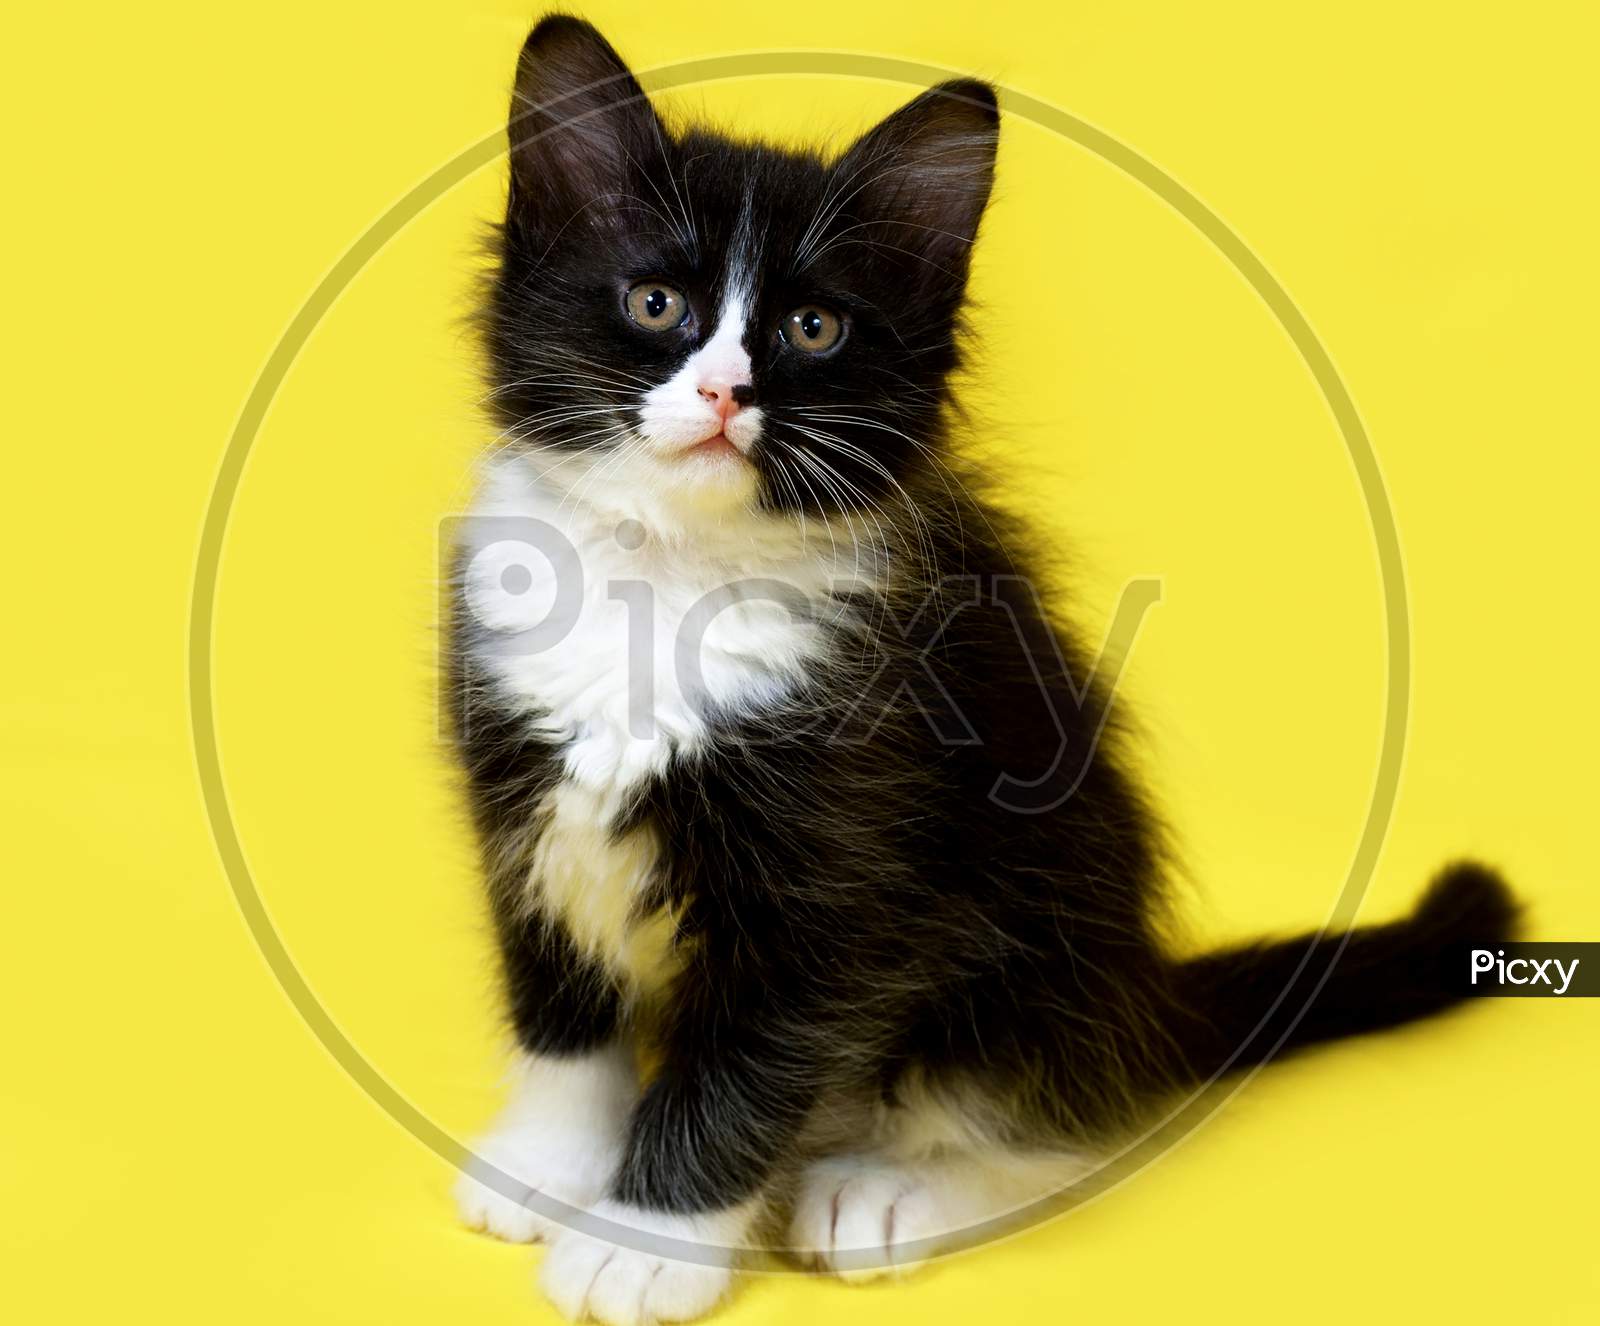 Small Fluffy Black And White Kitten Sitting On Yellow